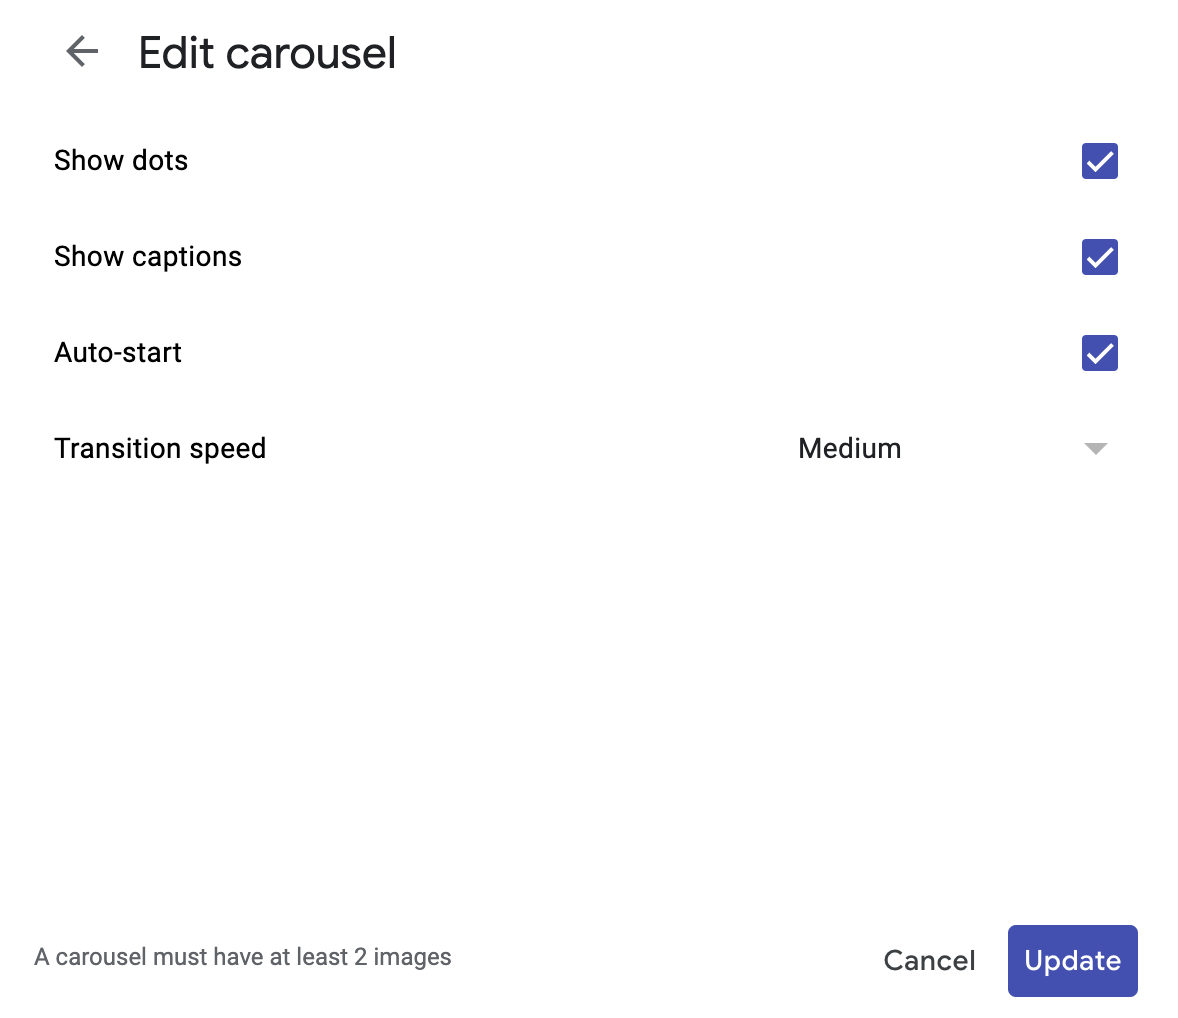 How to set an image carousel to automatically start and manage the transition speed in Google Sites.